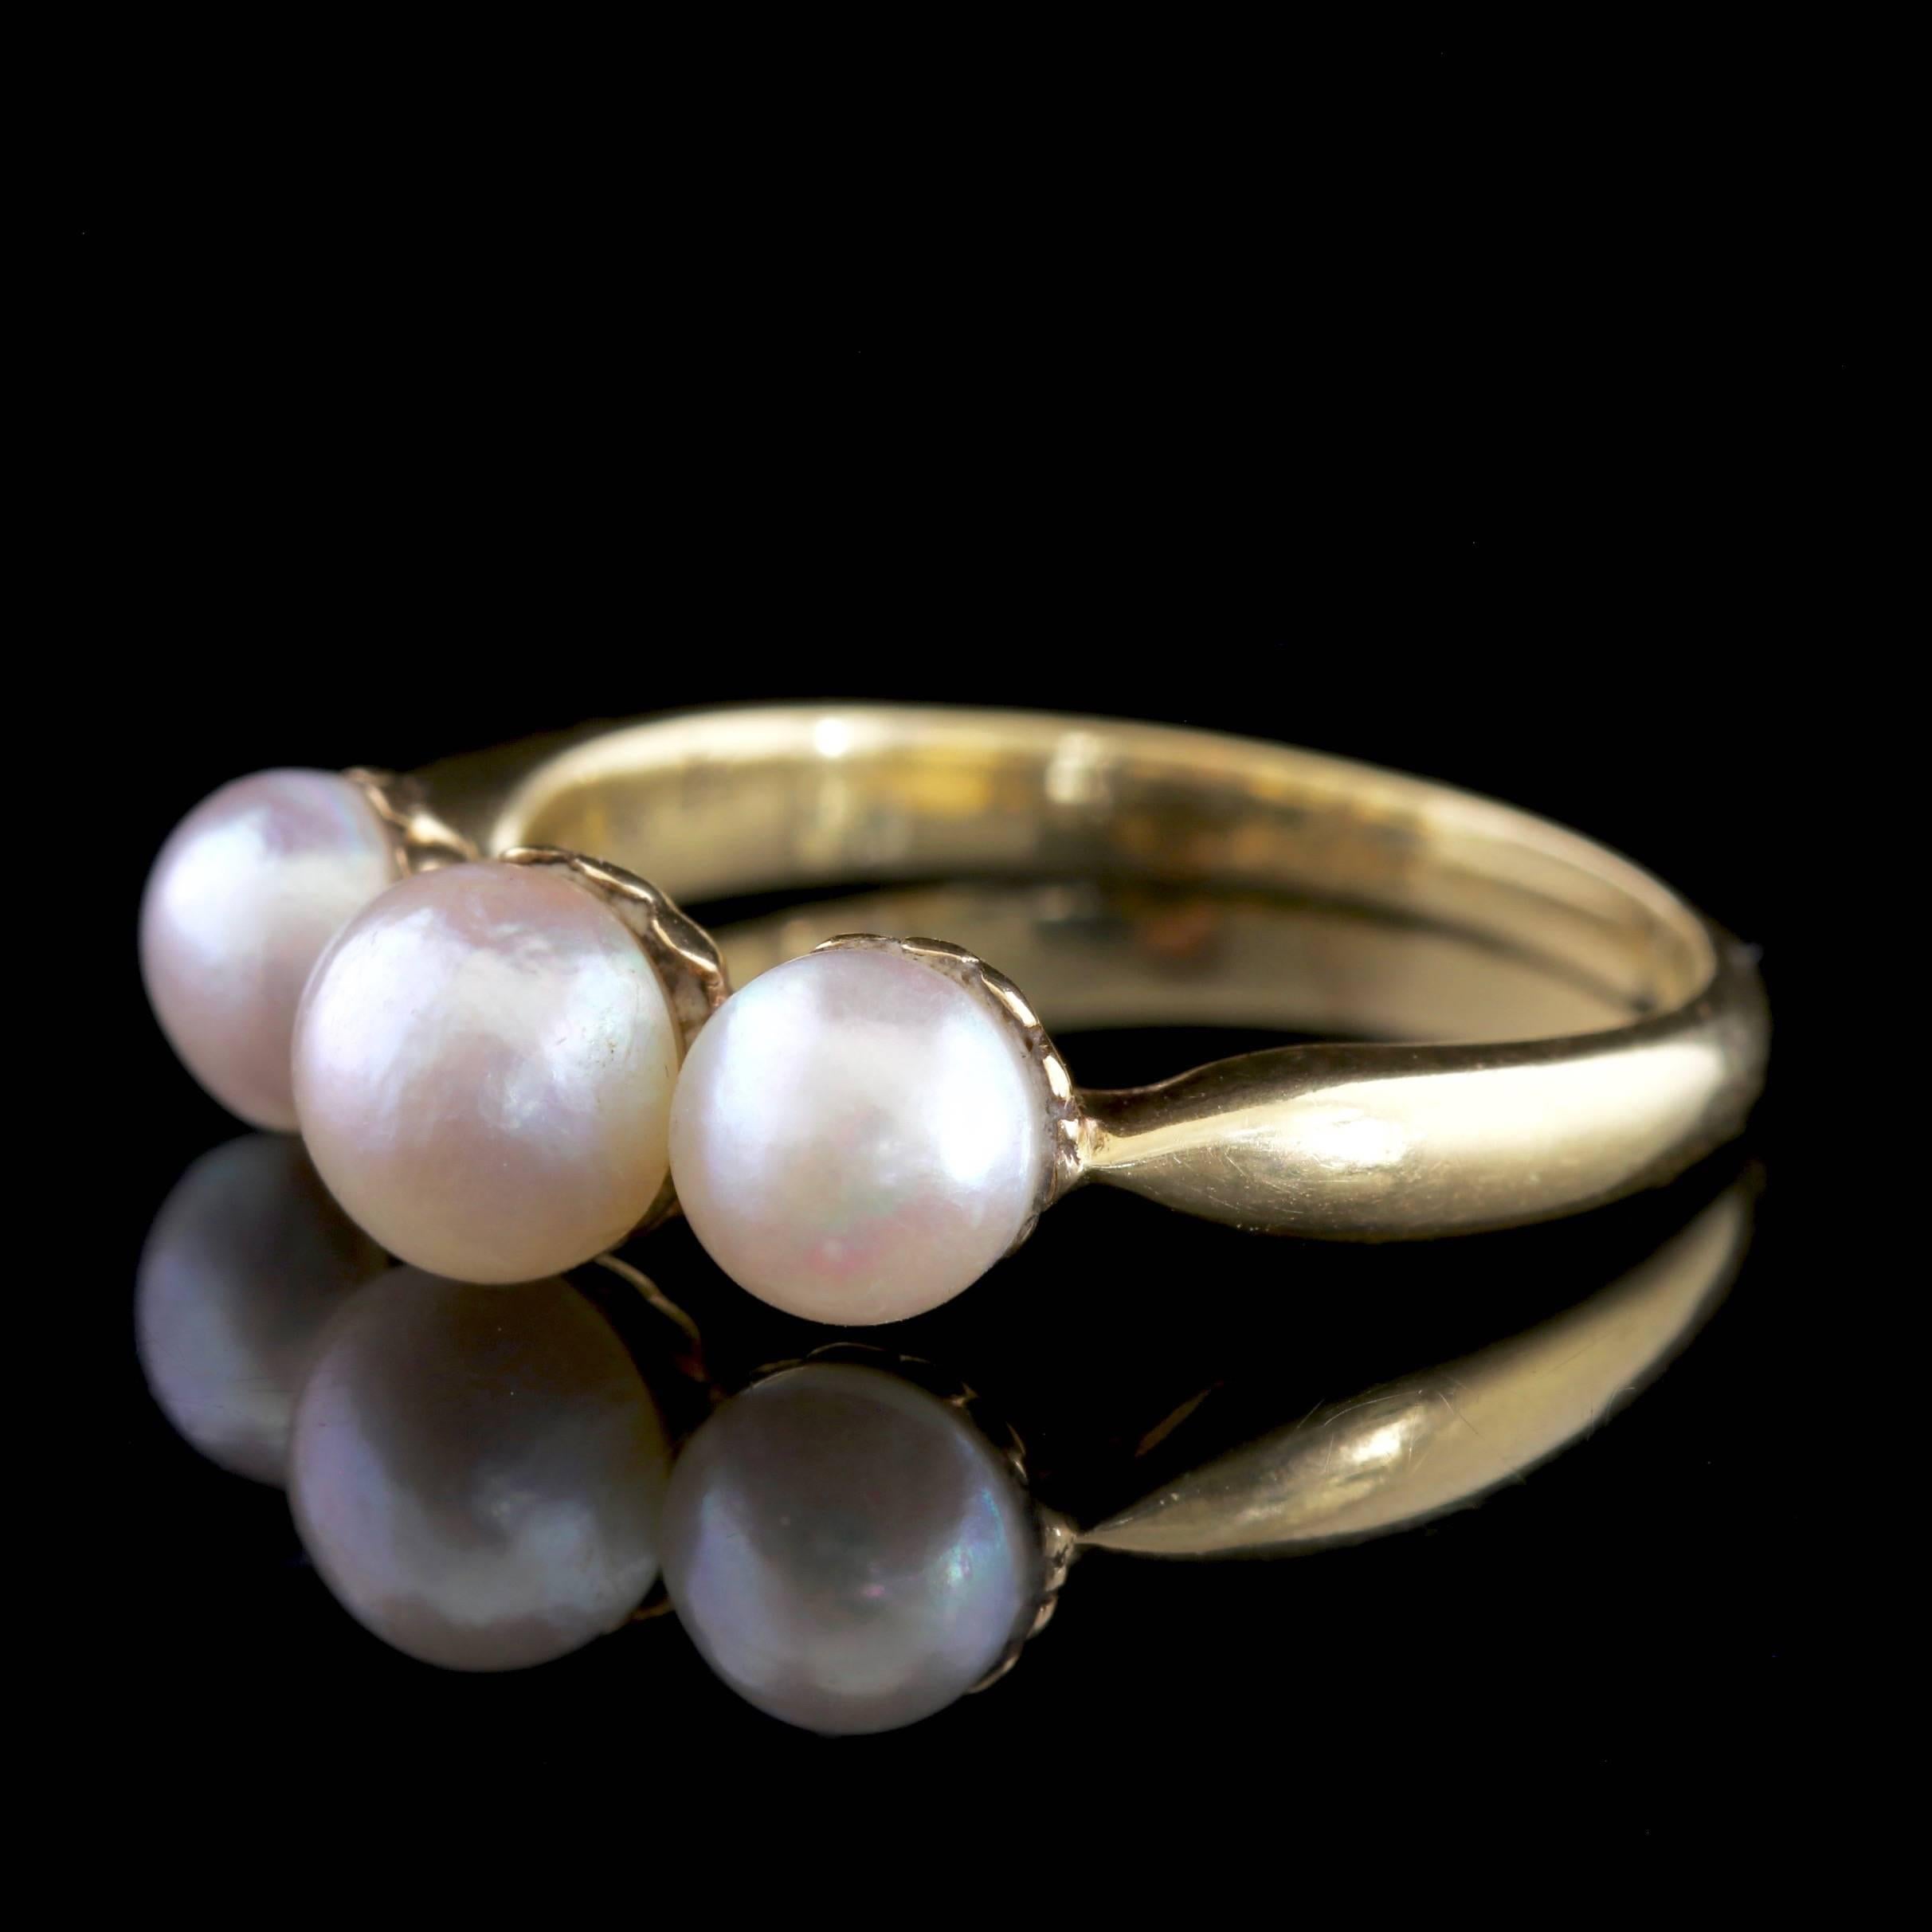 To read more please click continue reading below-

This fabulous antique Victorian 18ct Gold French trilogy ring is set with three fabulous pearls, Circa 1900. 

A Trilogy of stones represents past, present and future Or those 3 little words 'I love